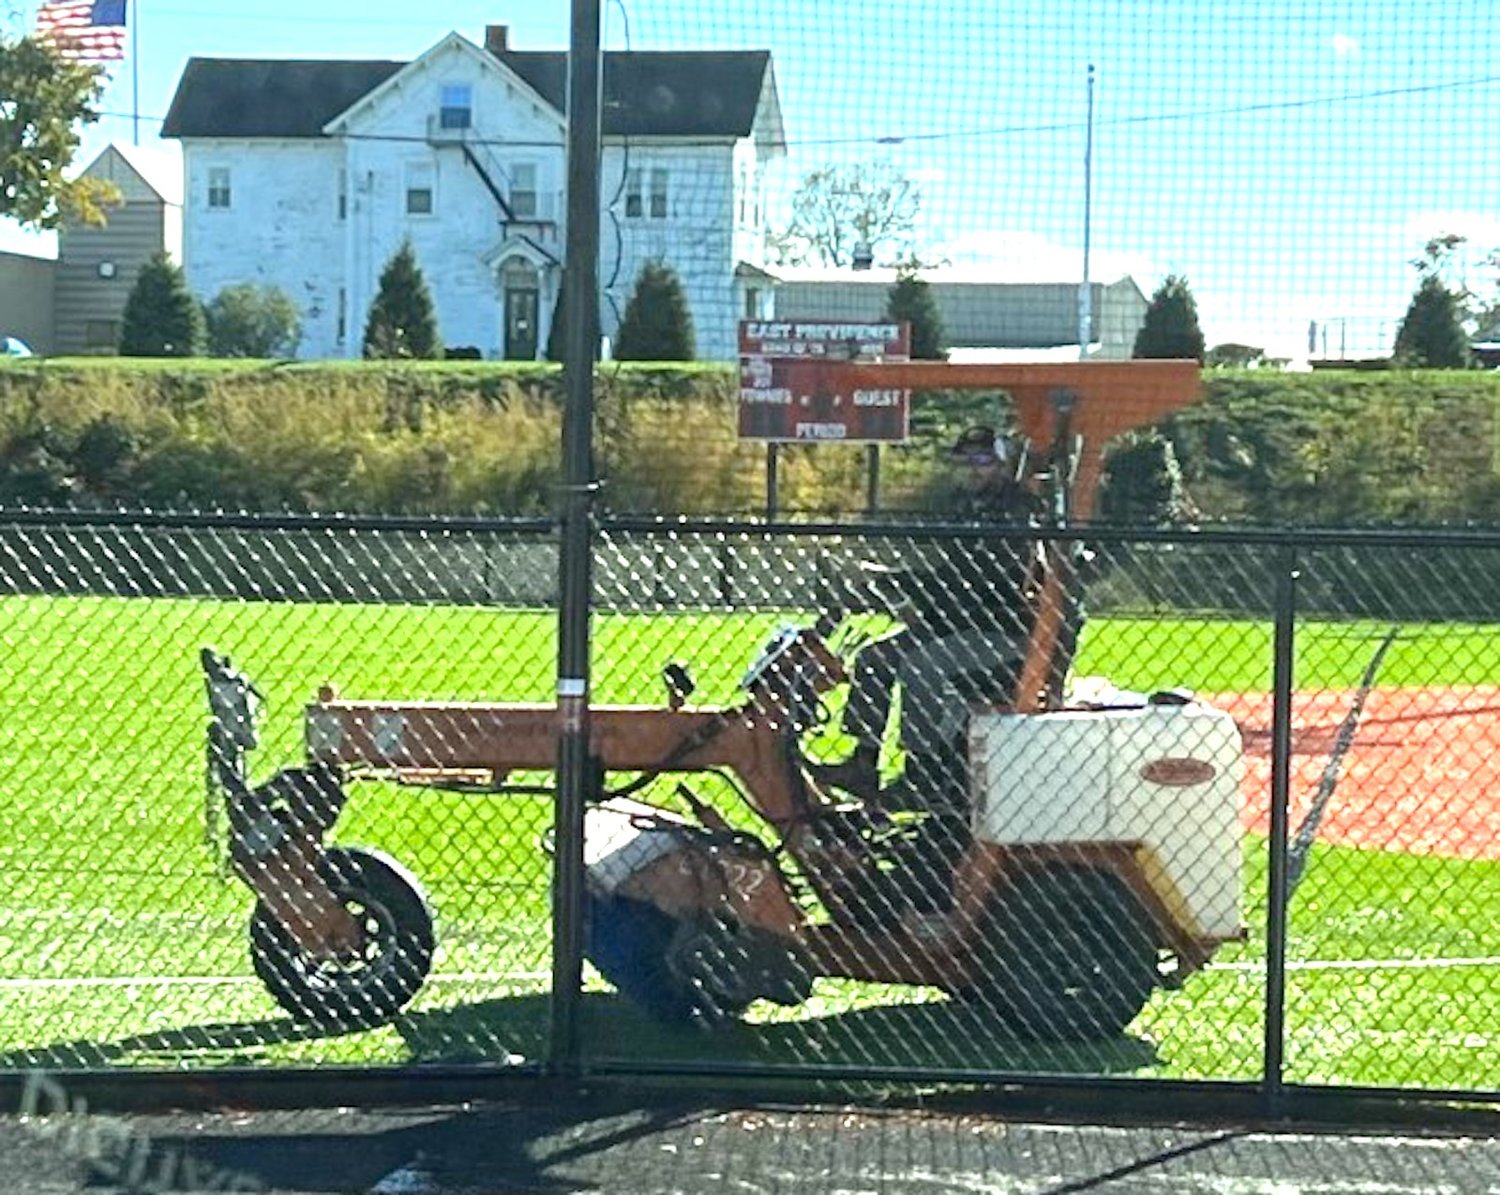 A worker brushes the new artificial turf softball field at EPHS.